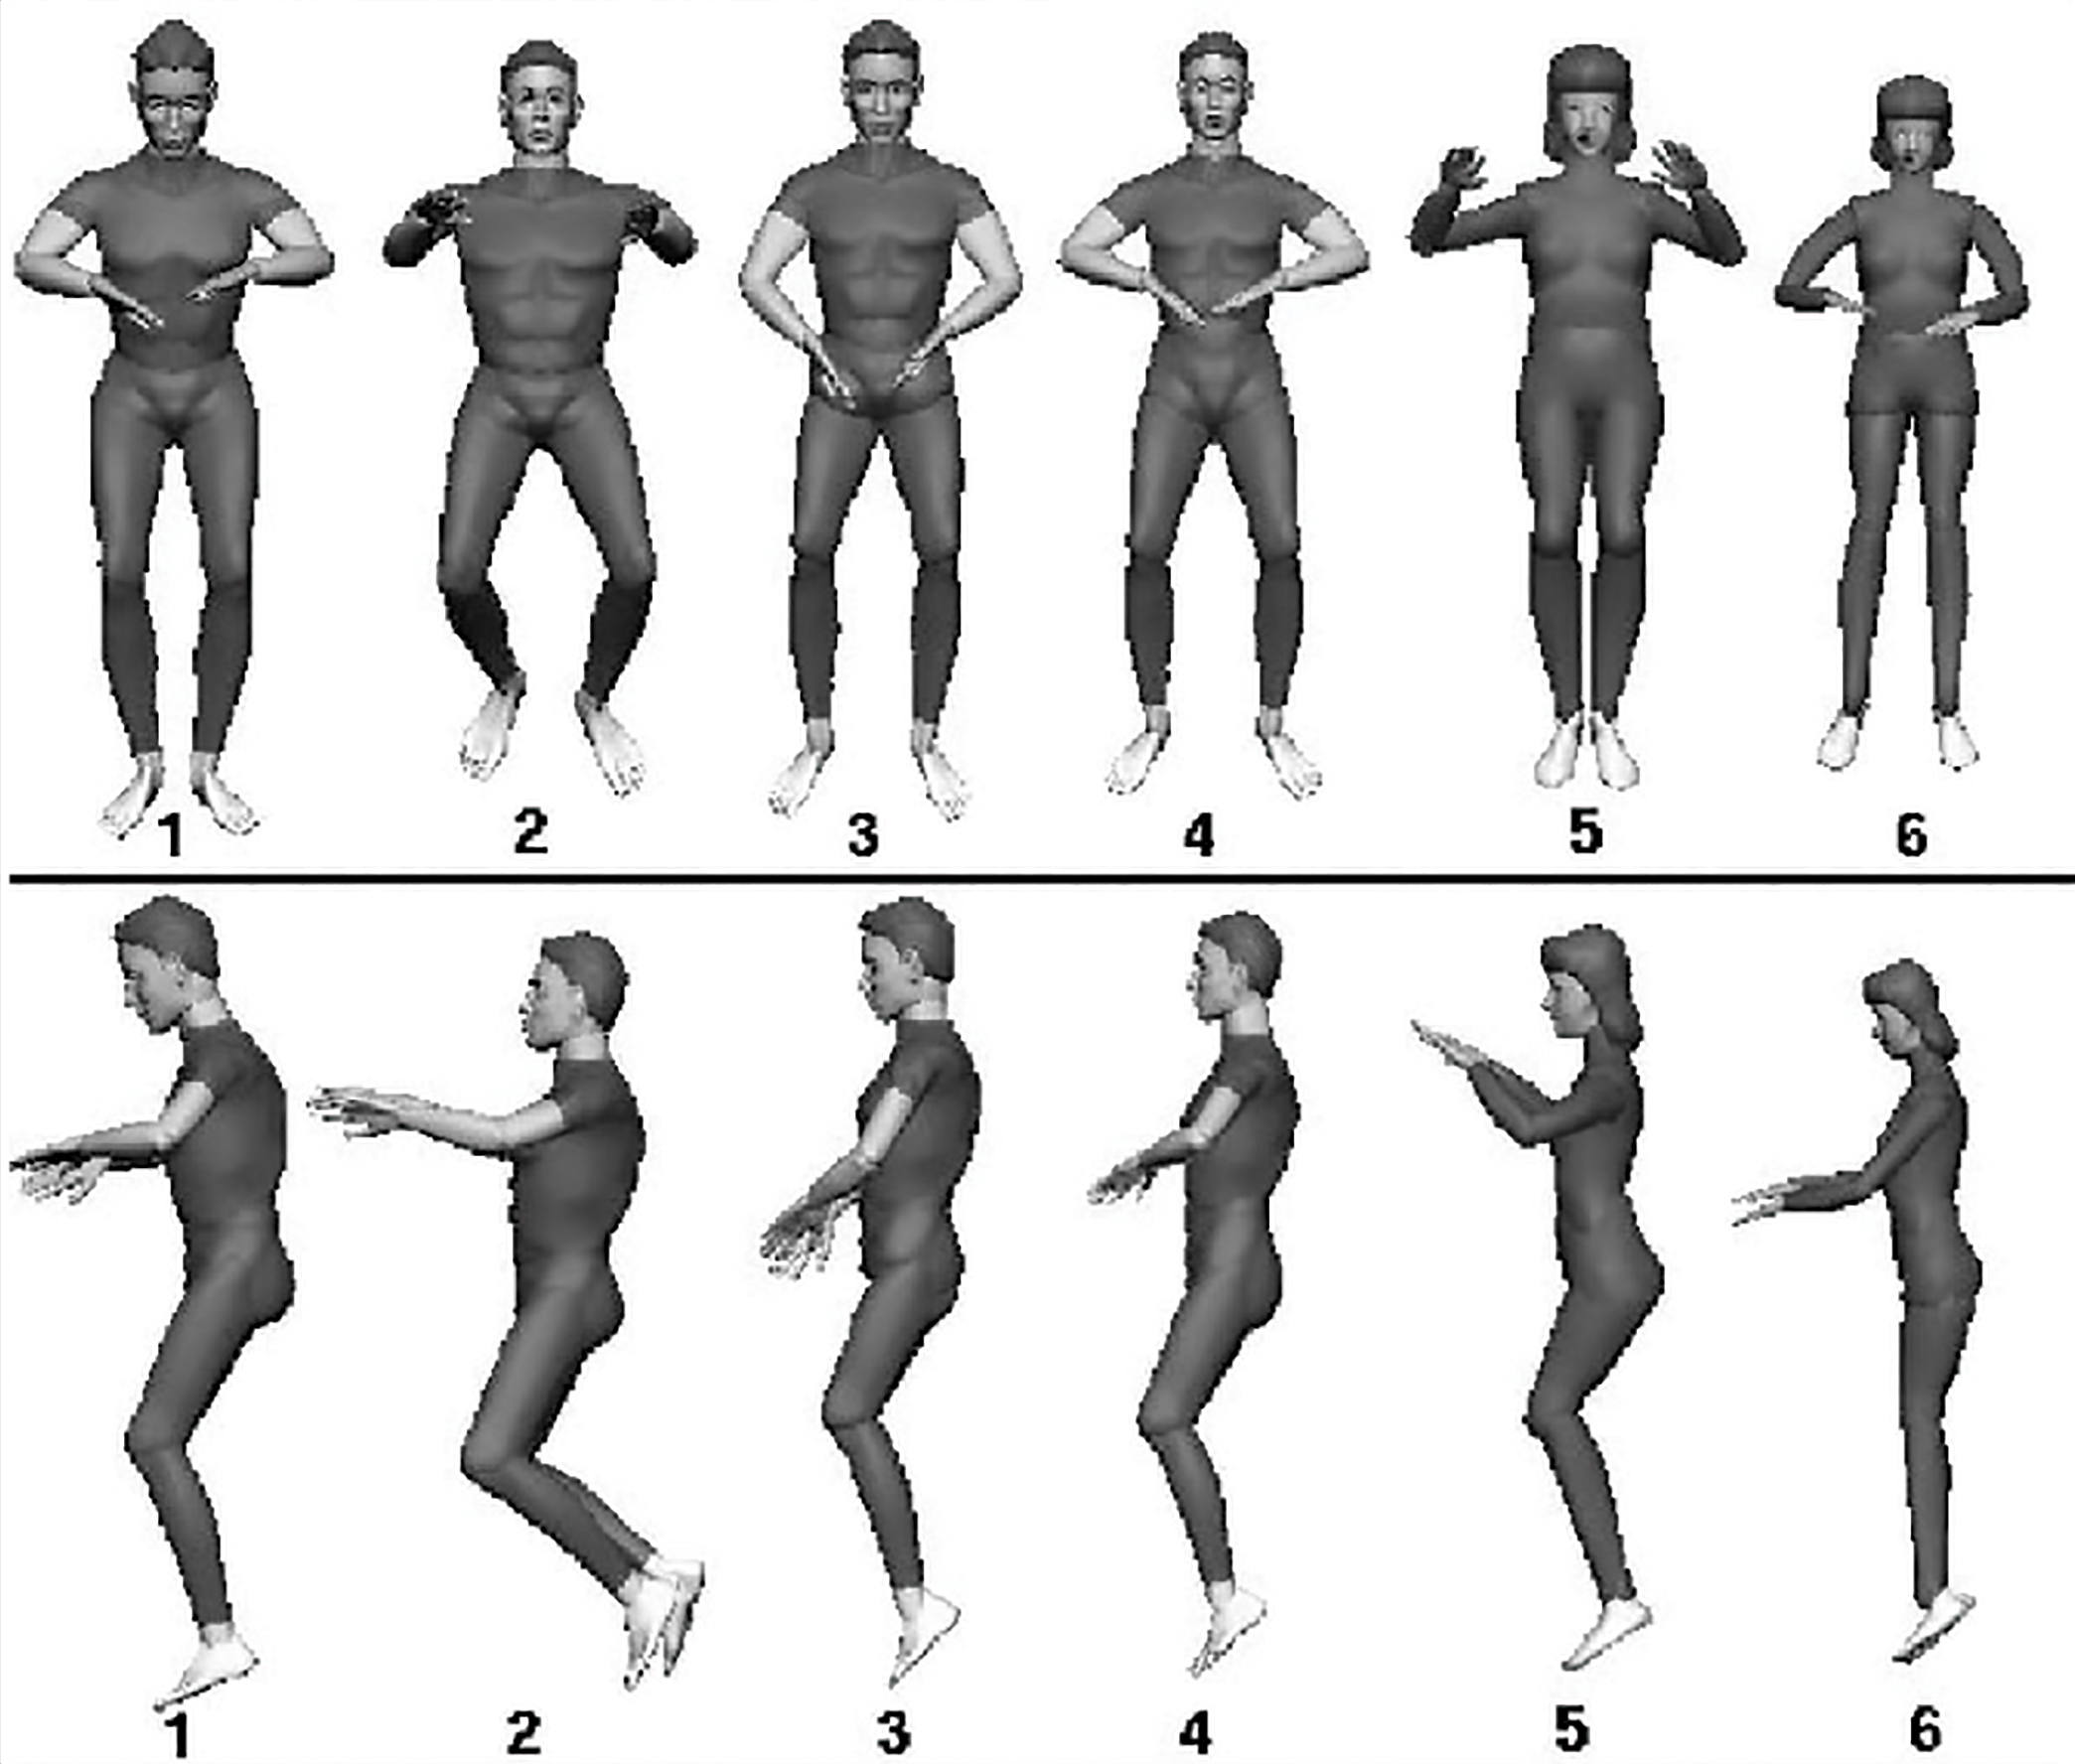 Six frontal and side views of people in various positions of neutral body posture